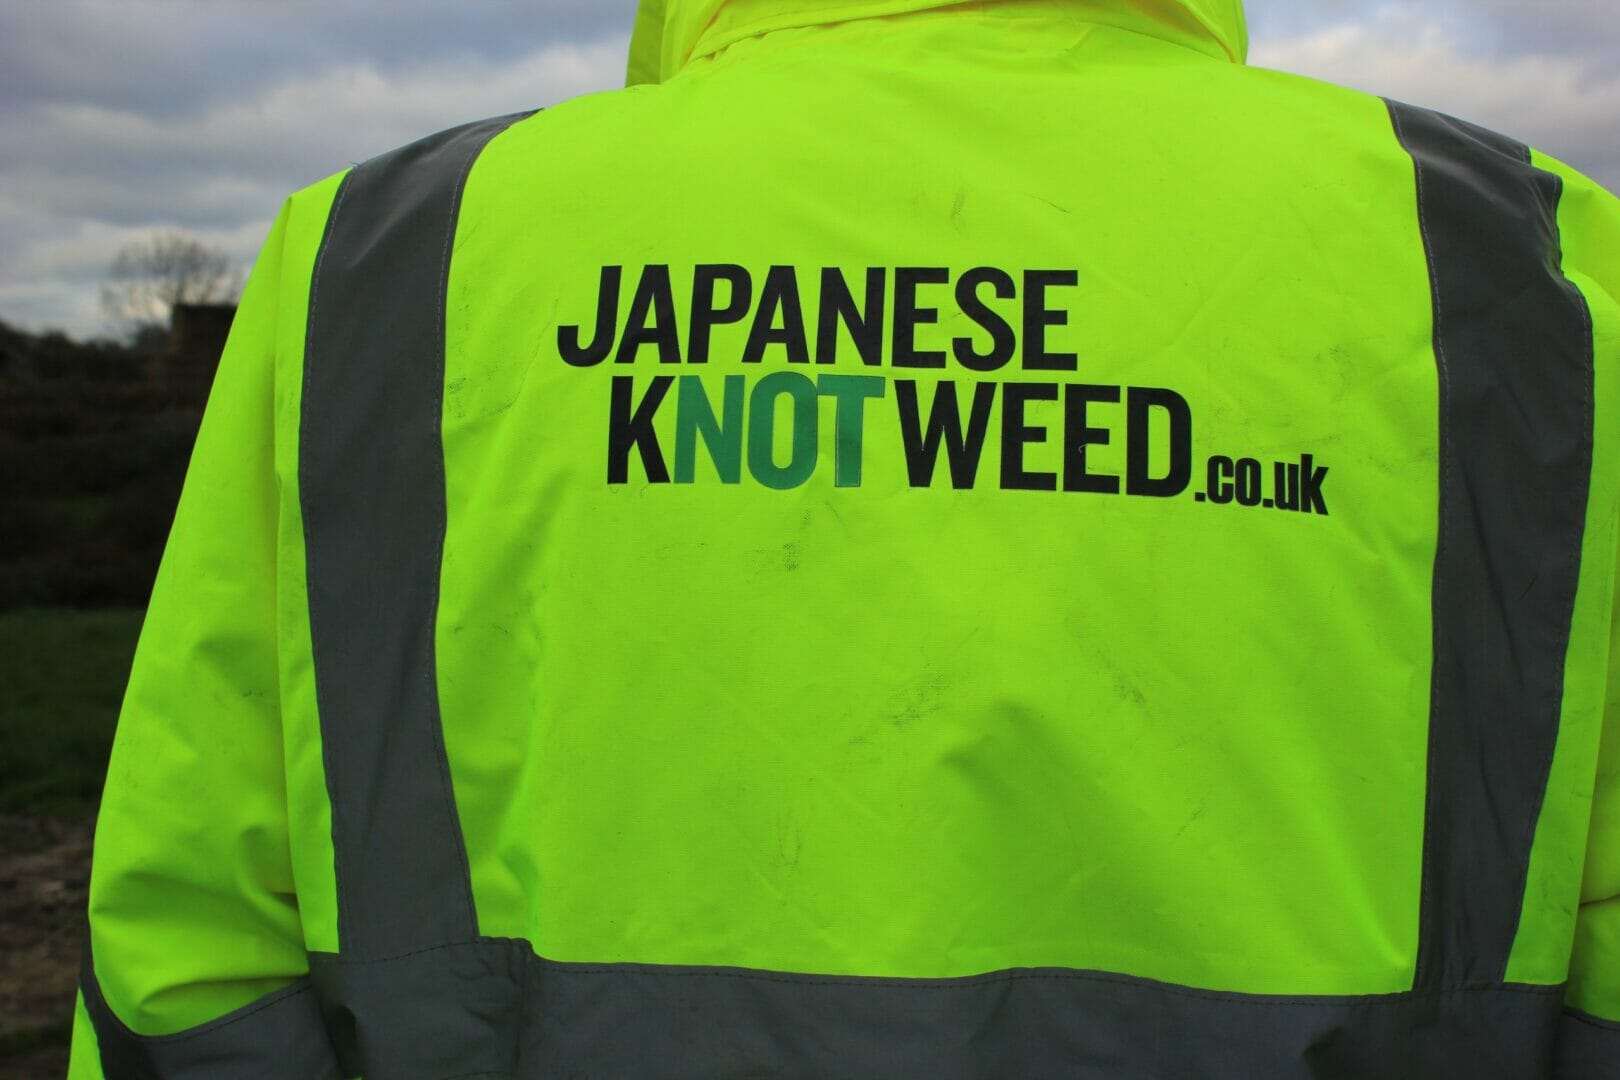 Japanese Knotweed: It’s Knot to be Ignored